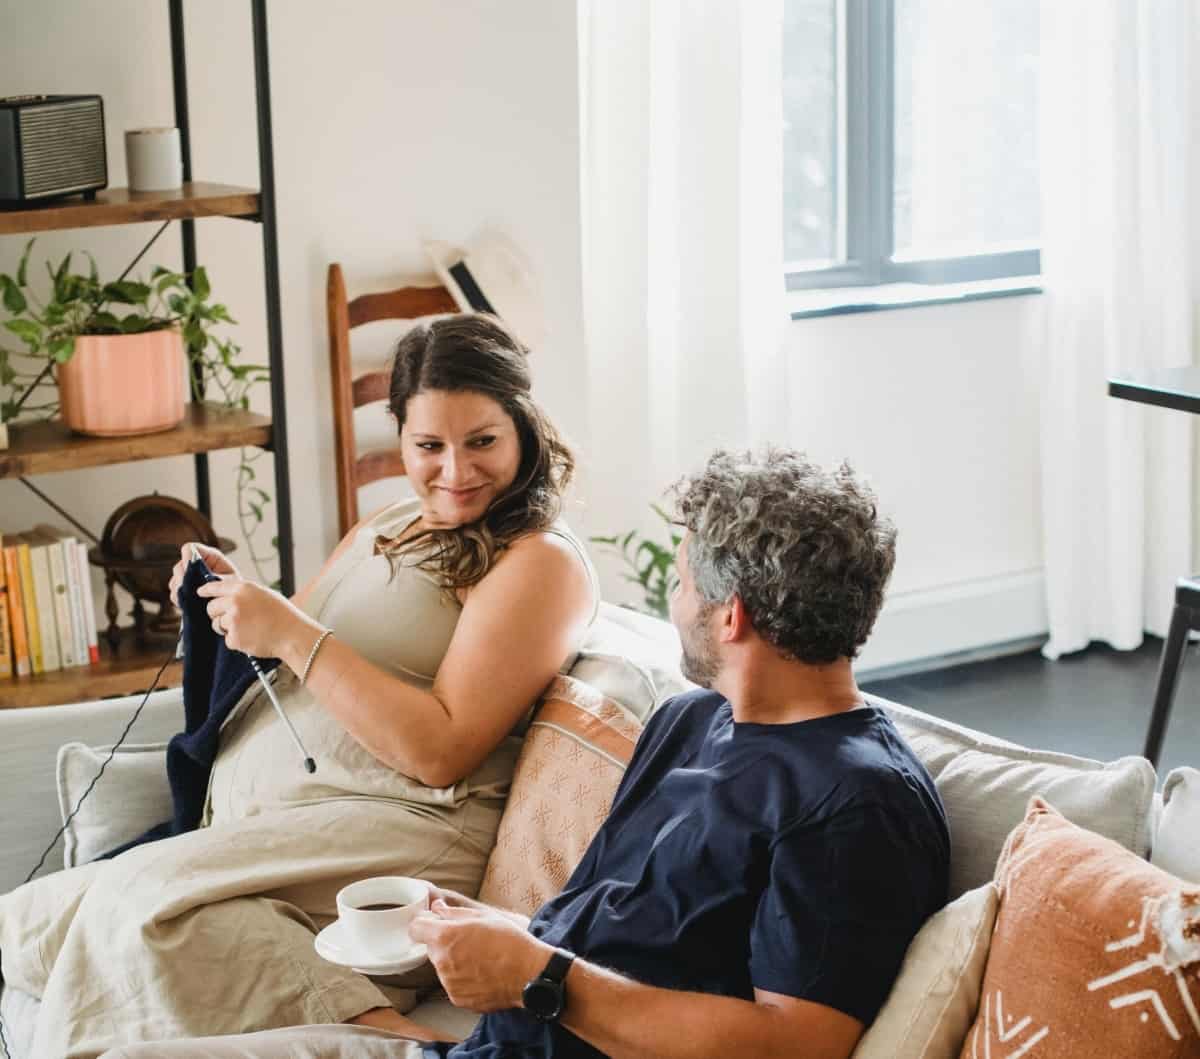 A pregnant woman sits on the couch inside of a living room while knitting next to her husband, who is drinking coffee.